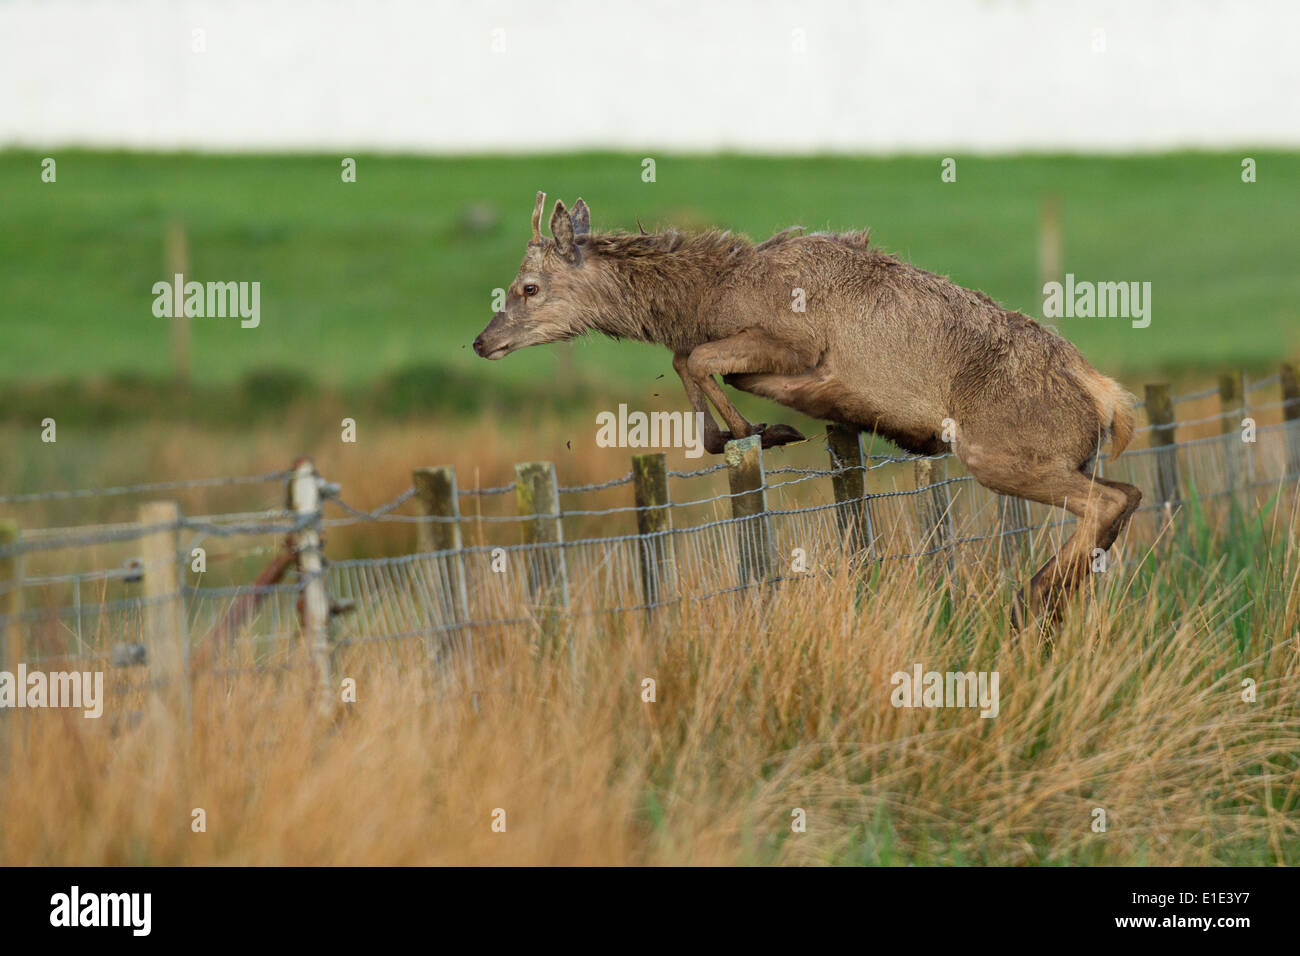 Action photograph of a Red Deer (Cervus elaphus) jumping a bard wire fence. North Uist, Outer Hebrides, Scotland, UK Stock Photo